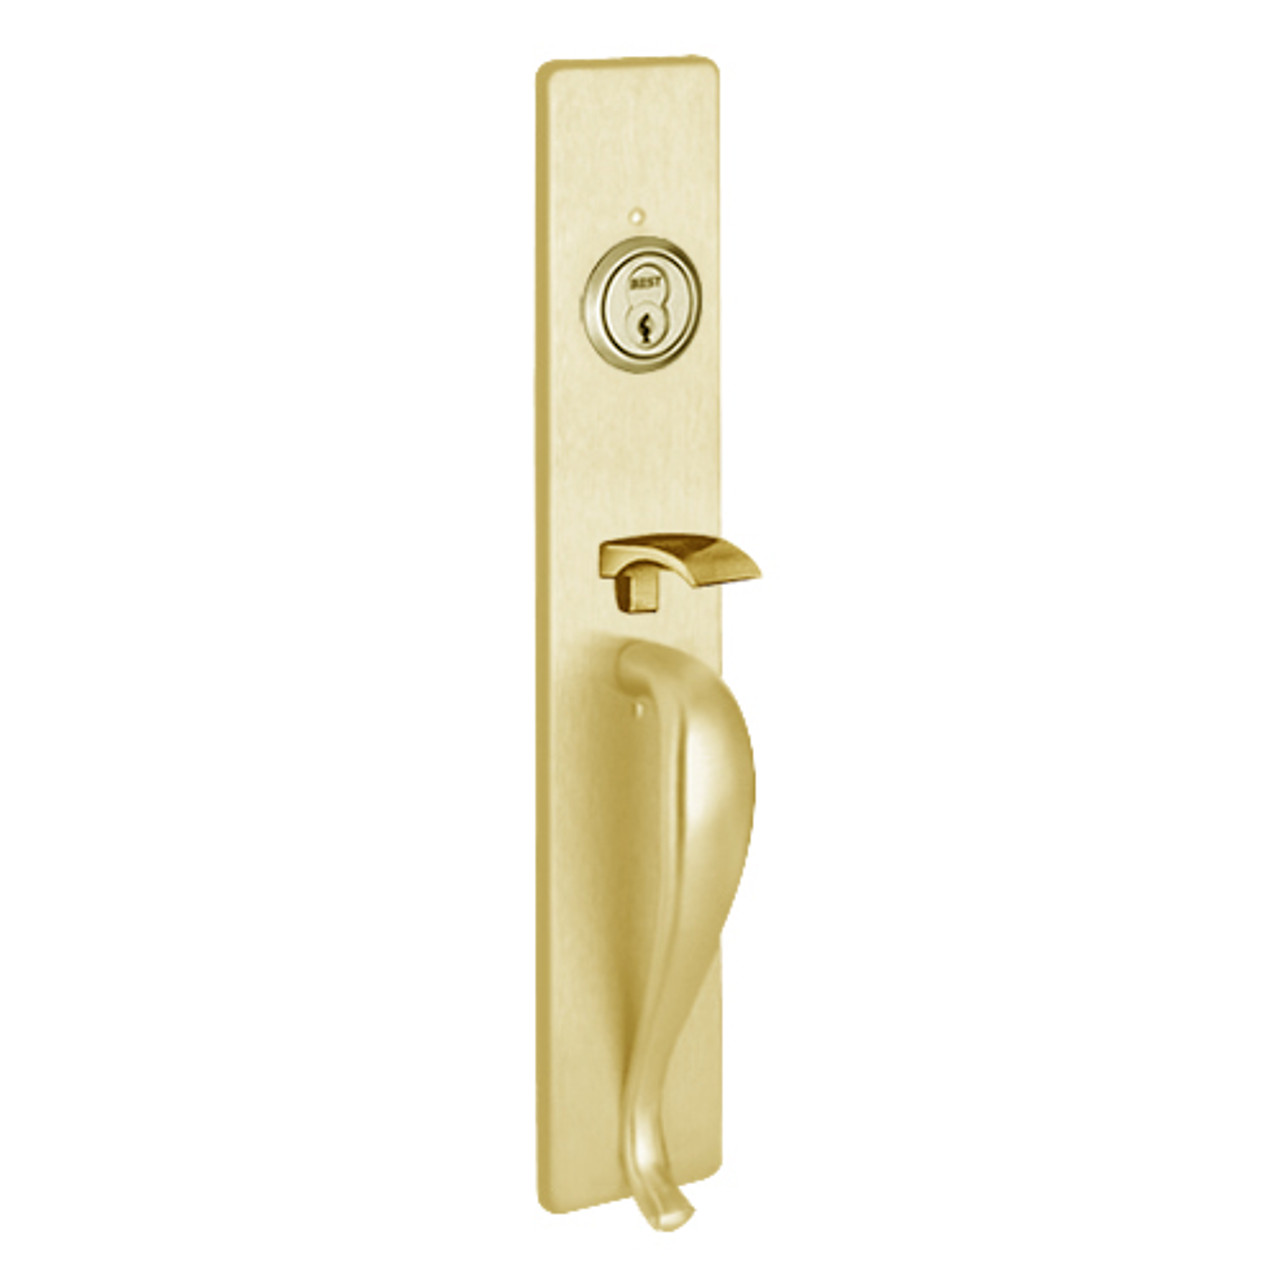 RM1715B-605 PHI Thumb Piece Always Active Retrofit Trim with B Design Pull for Apex and Olympian Series Exit Device in Bright Brass Finish